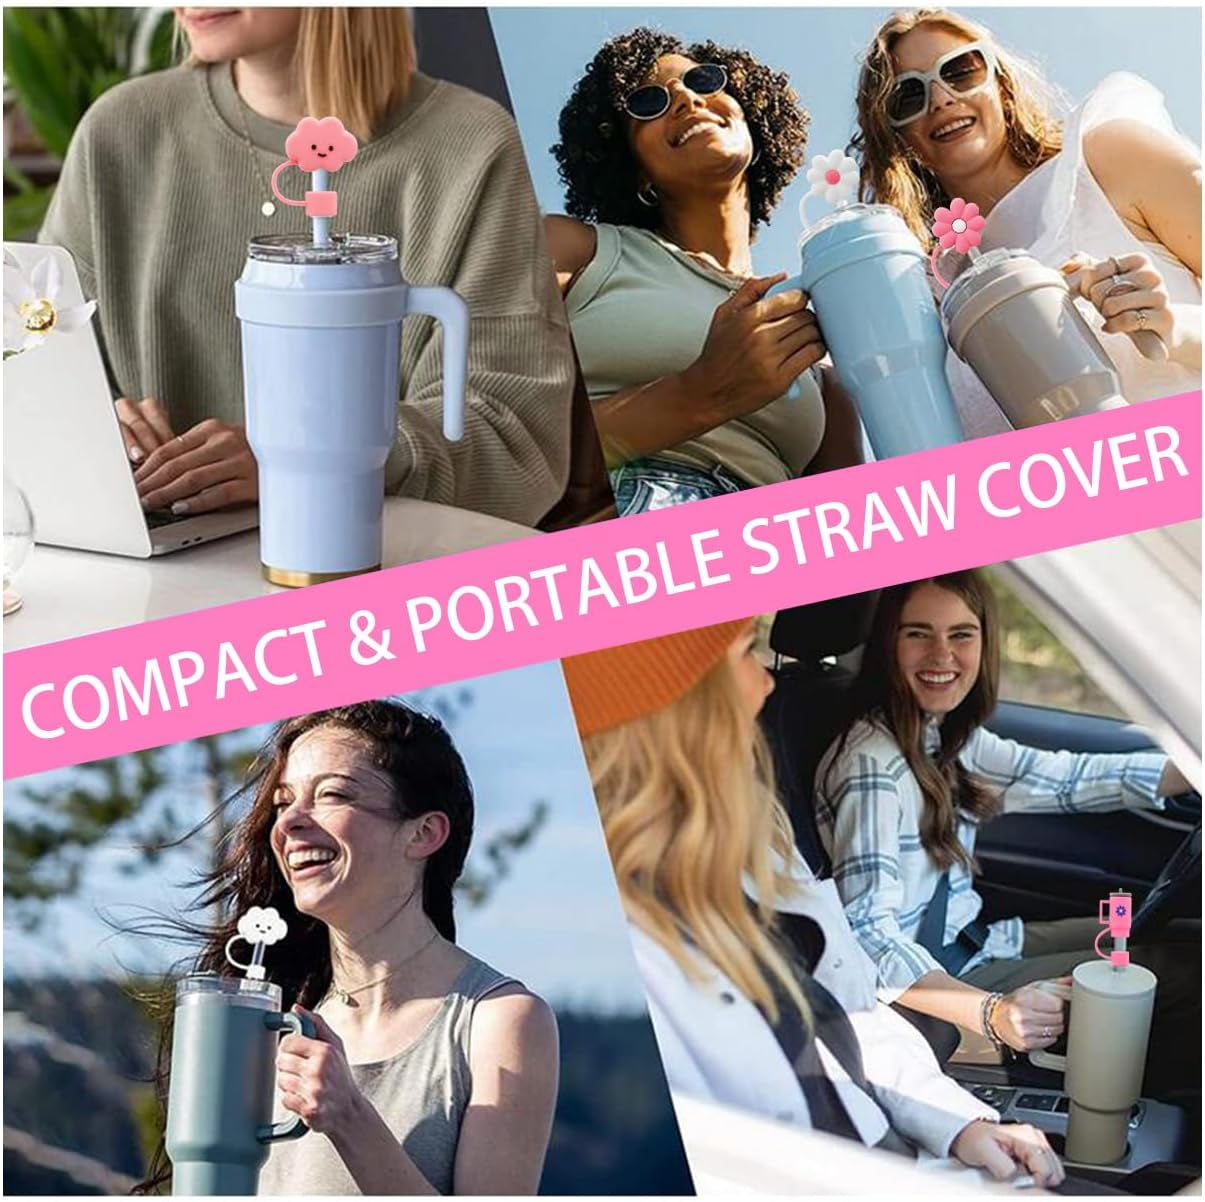 10Pcs Straw Cover,Straw Covers Cap for Stanley 30&40 Oz Tumbler,Straw  Toppers for Tumblers,Straw Covers for Reusable Straws,Drinking Straw